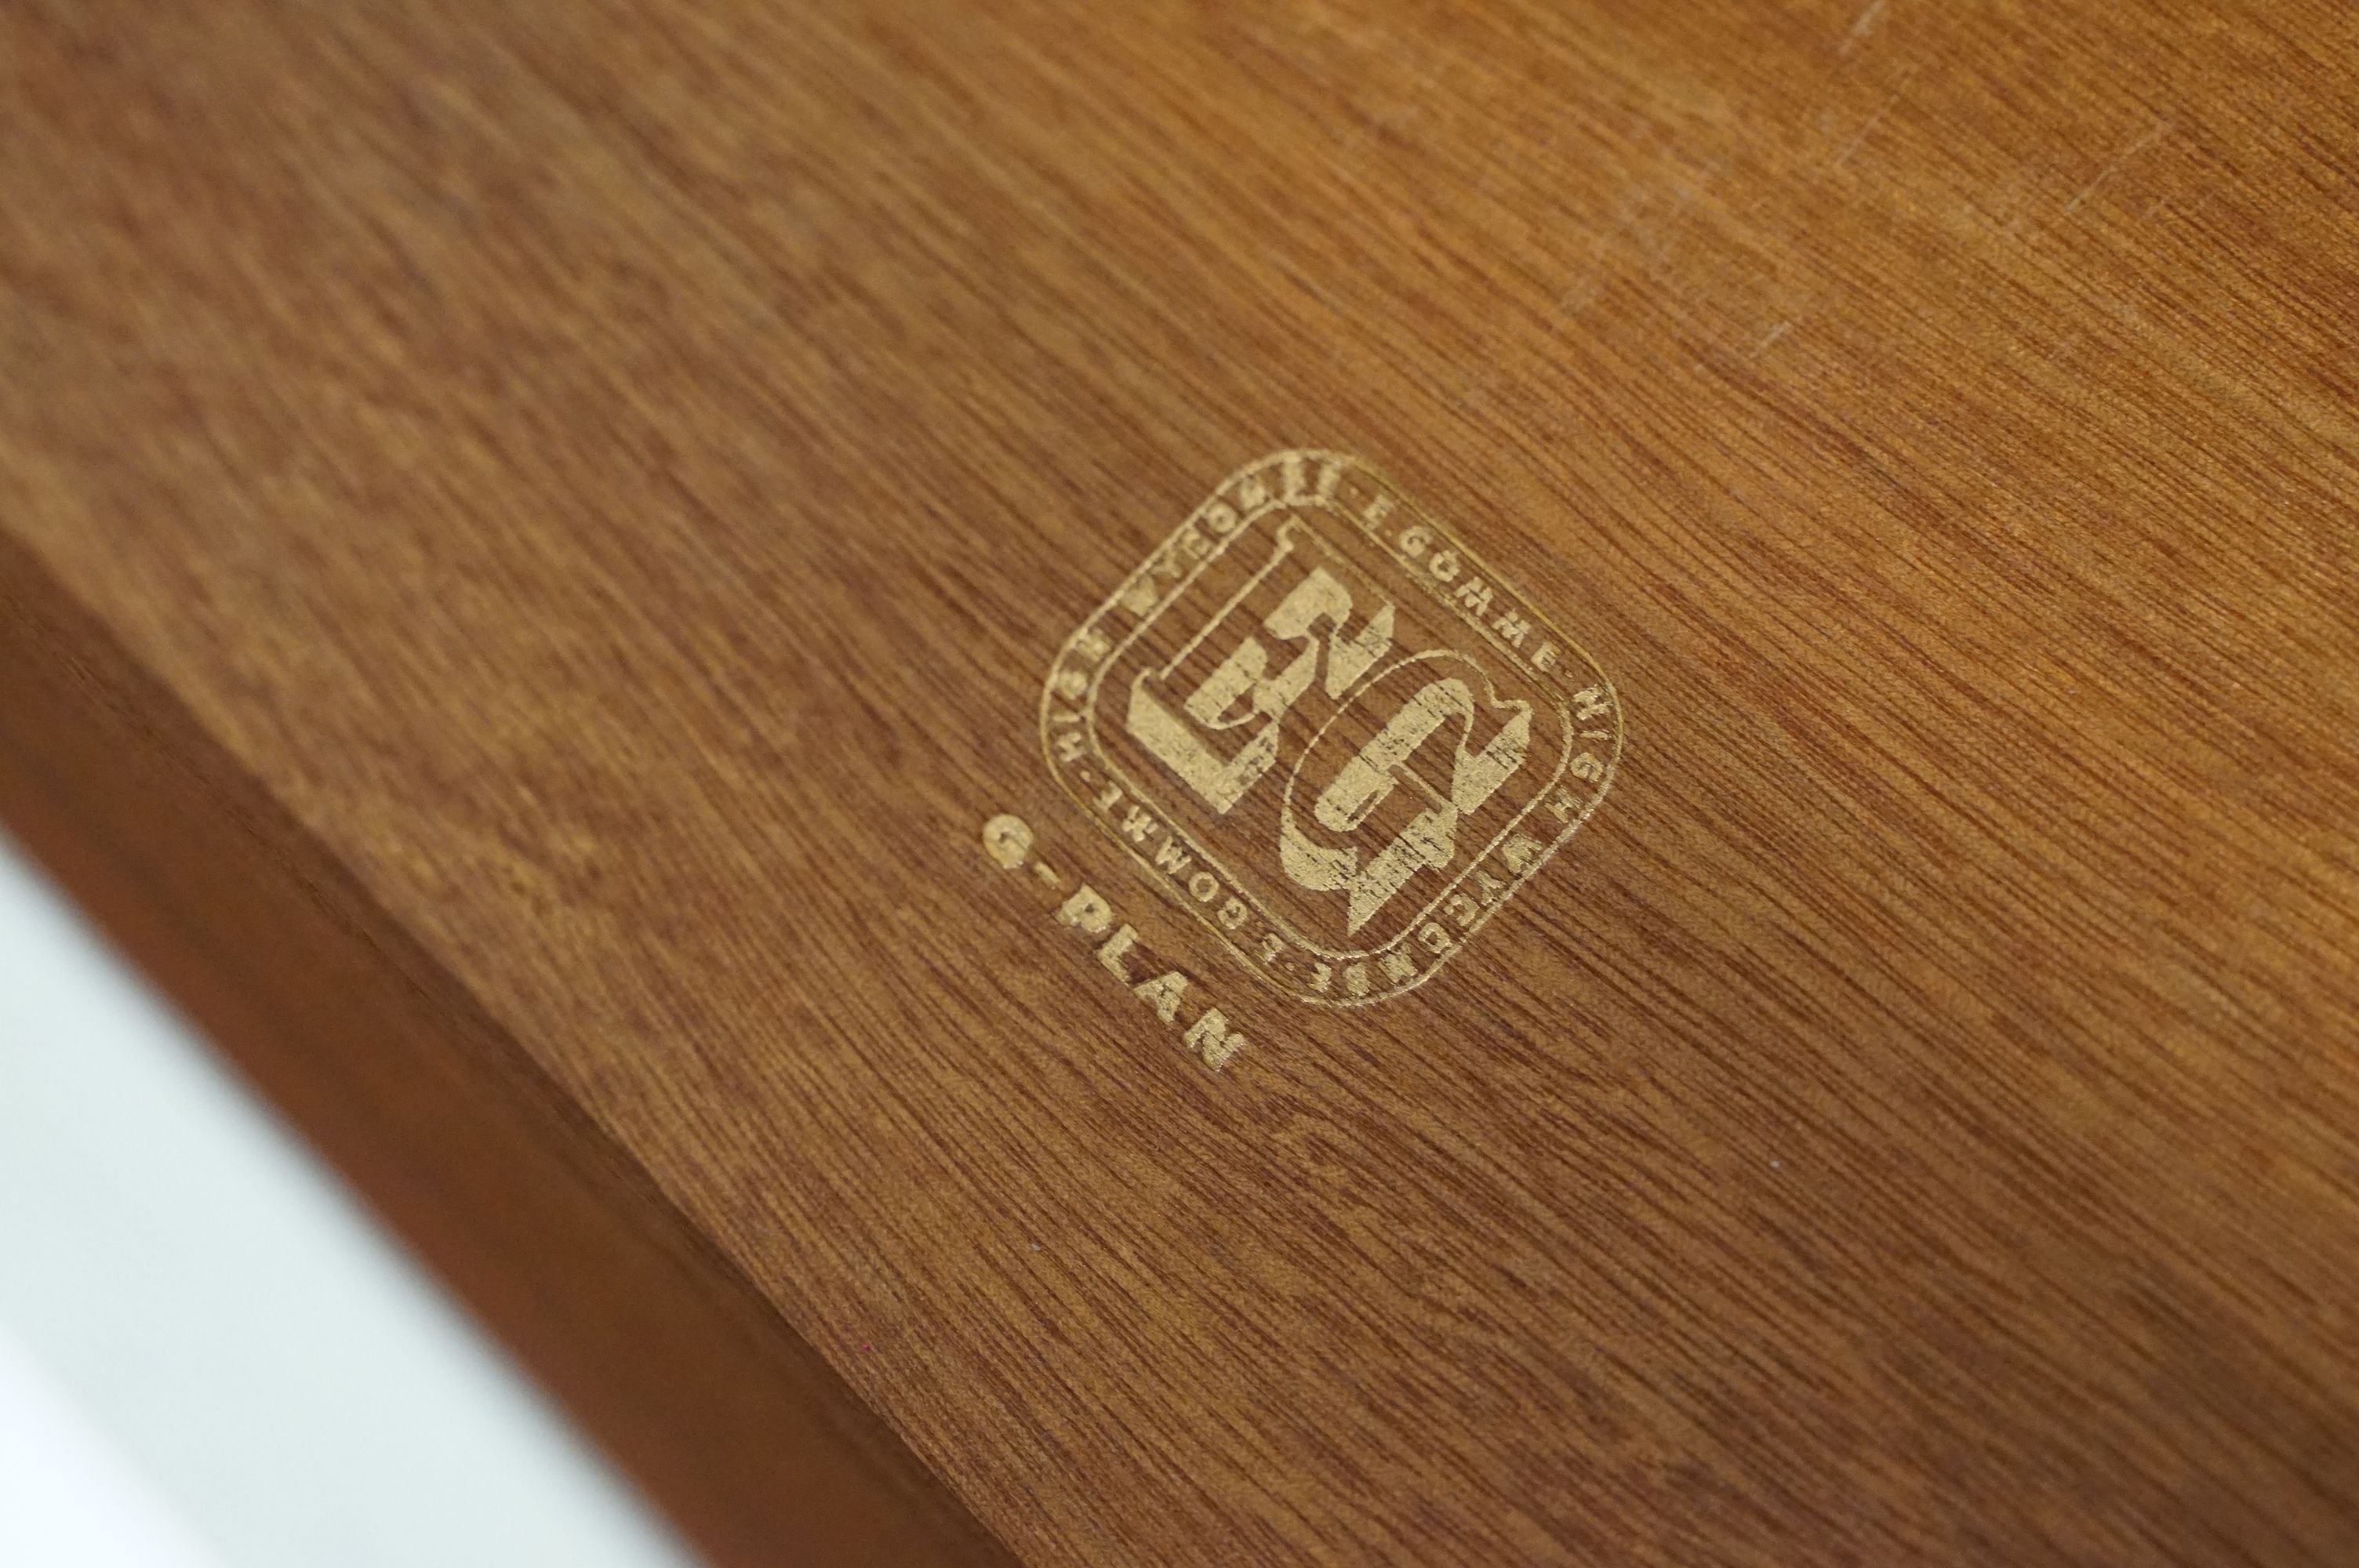 Mid century G Plan Librenza chest of seven drawers, with embossed G Plan logo and retailer's label - Image 4 of 9